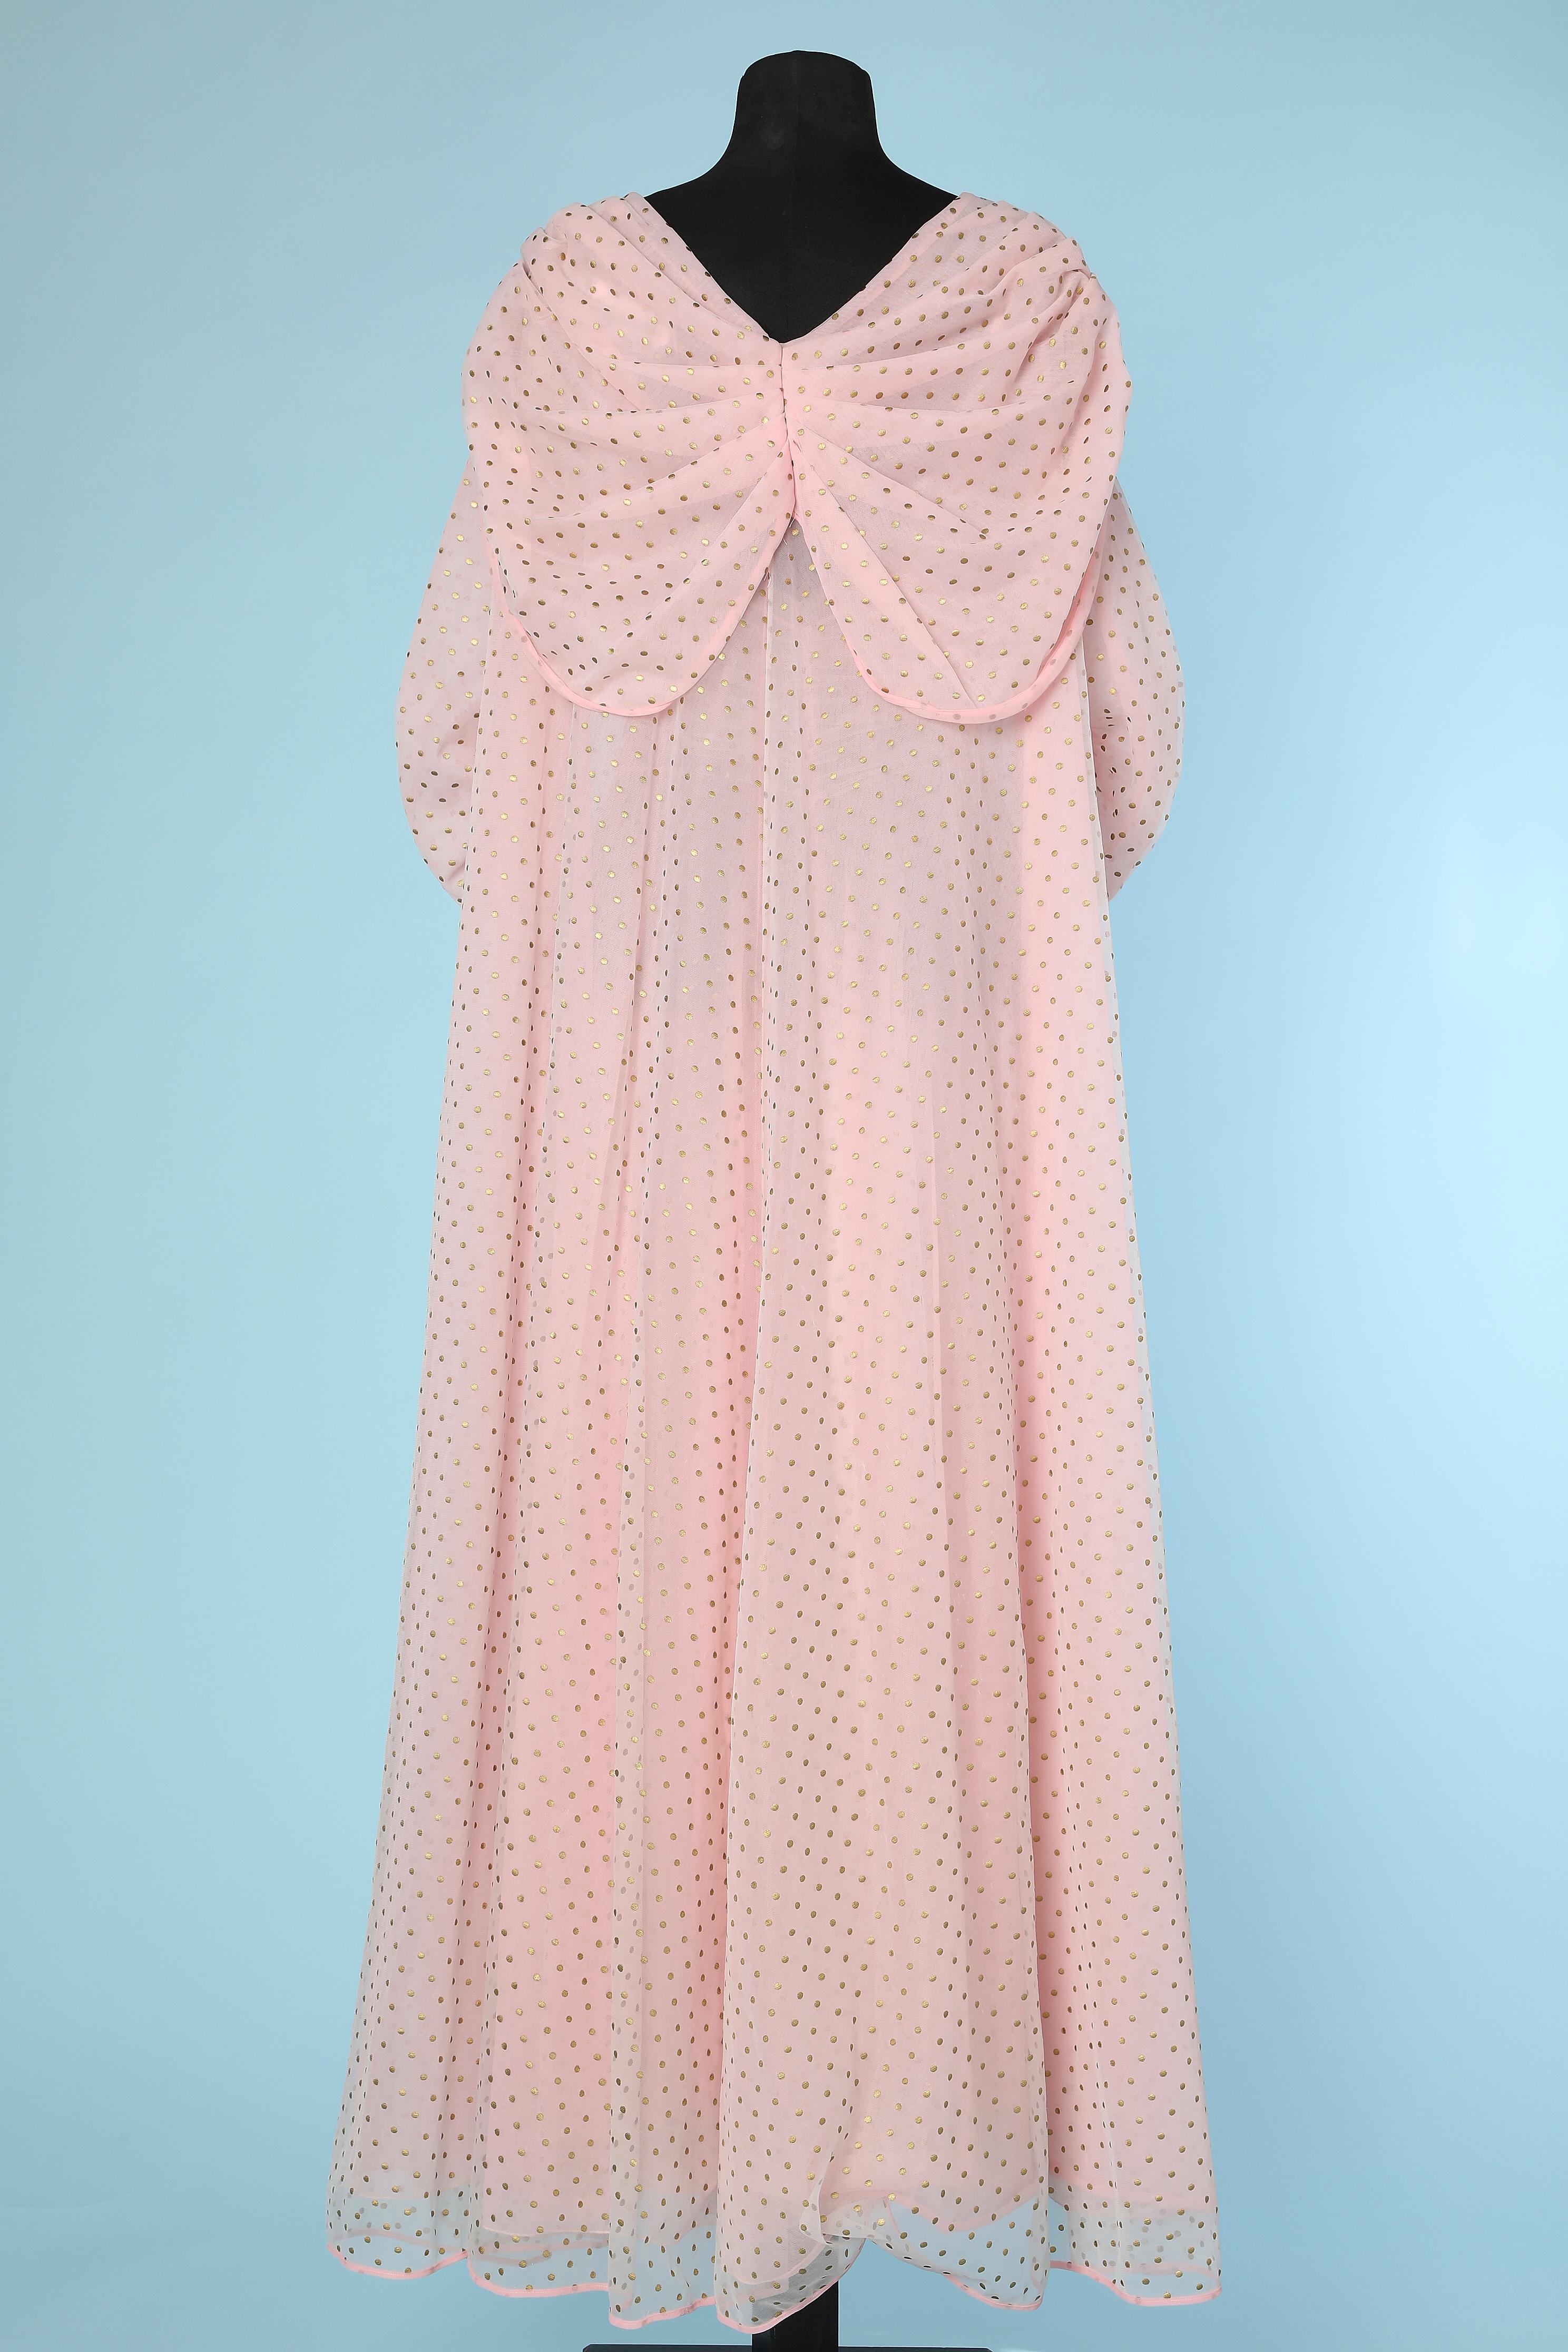 Women's Robe and night-gown in pink nylon and tulle with gold Polka dots Schiaparelli  For Sale